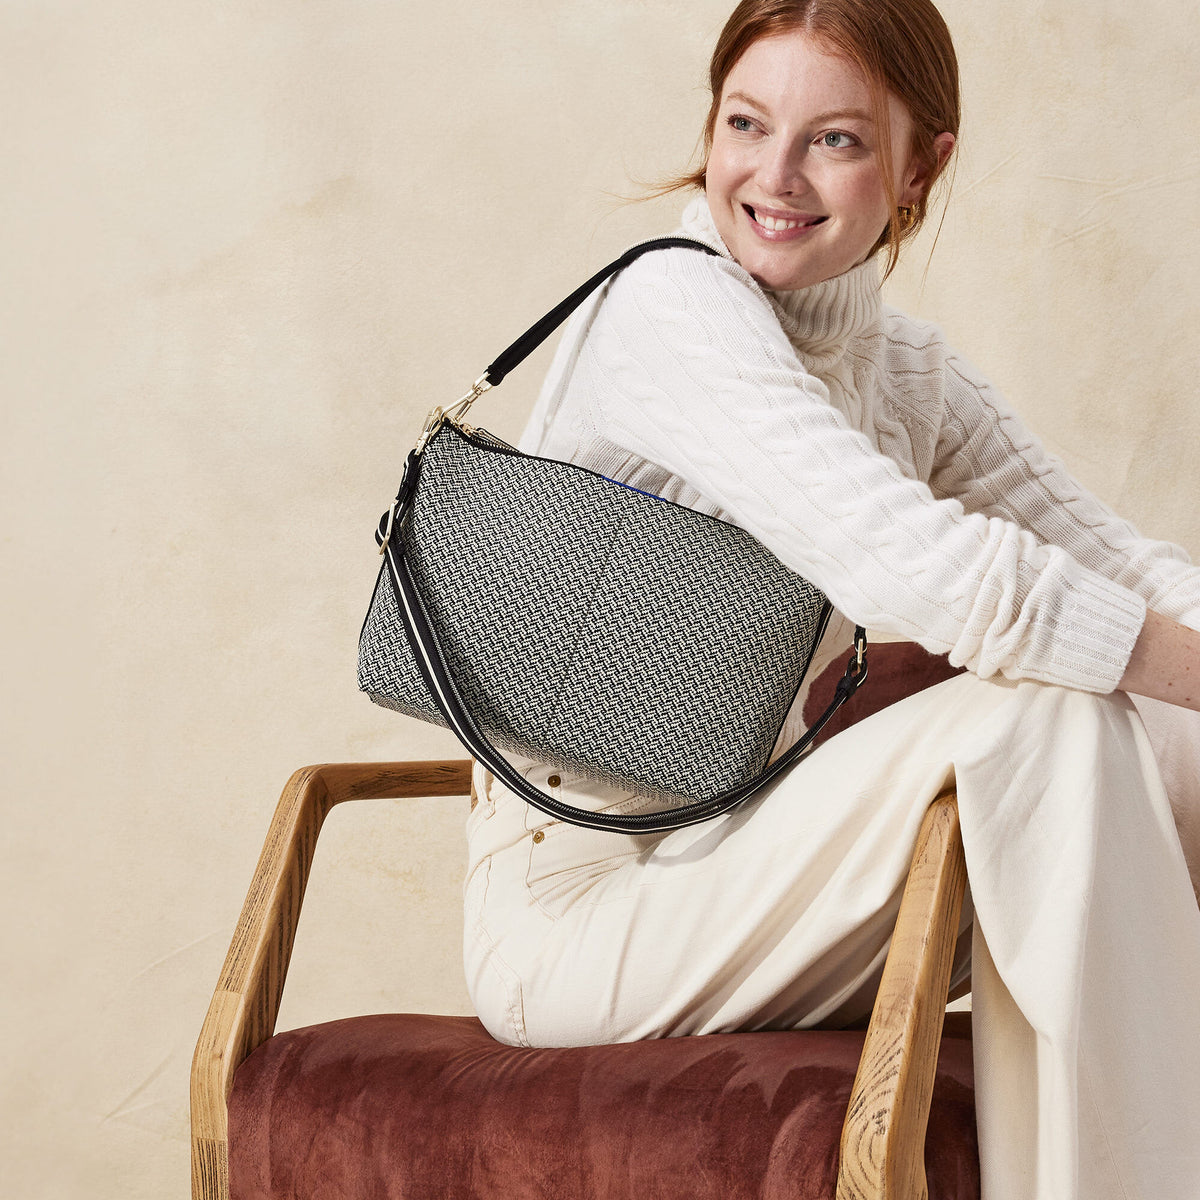 Rothy's - The Daily Crossbody in Black/Grey/Neutral